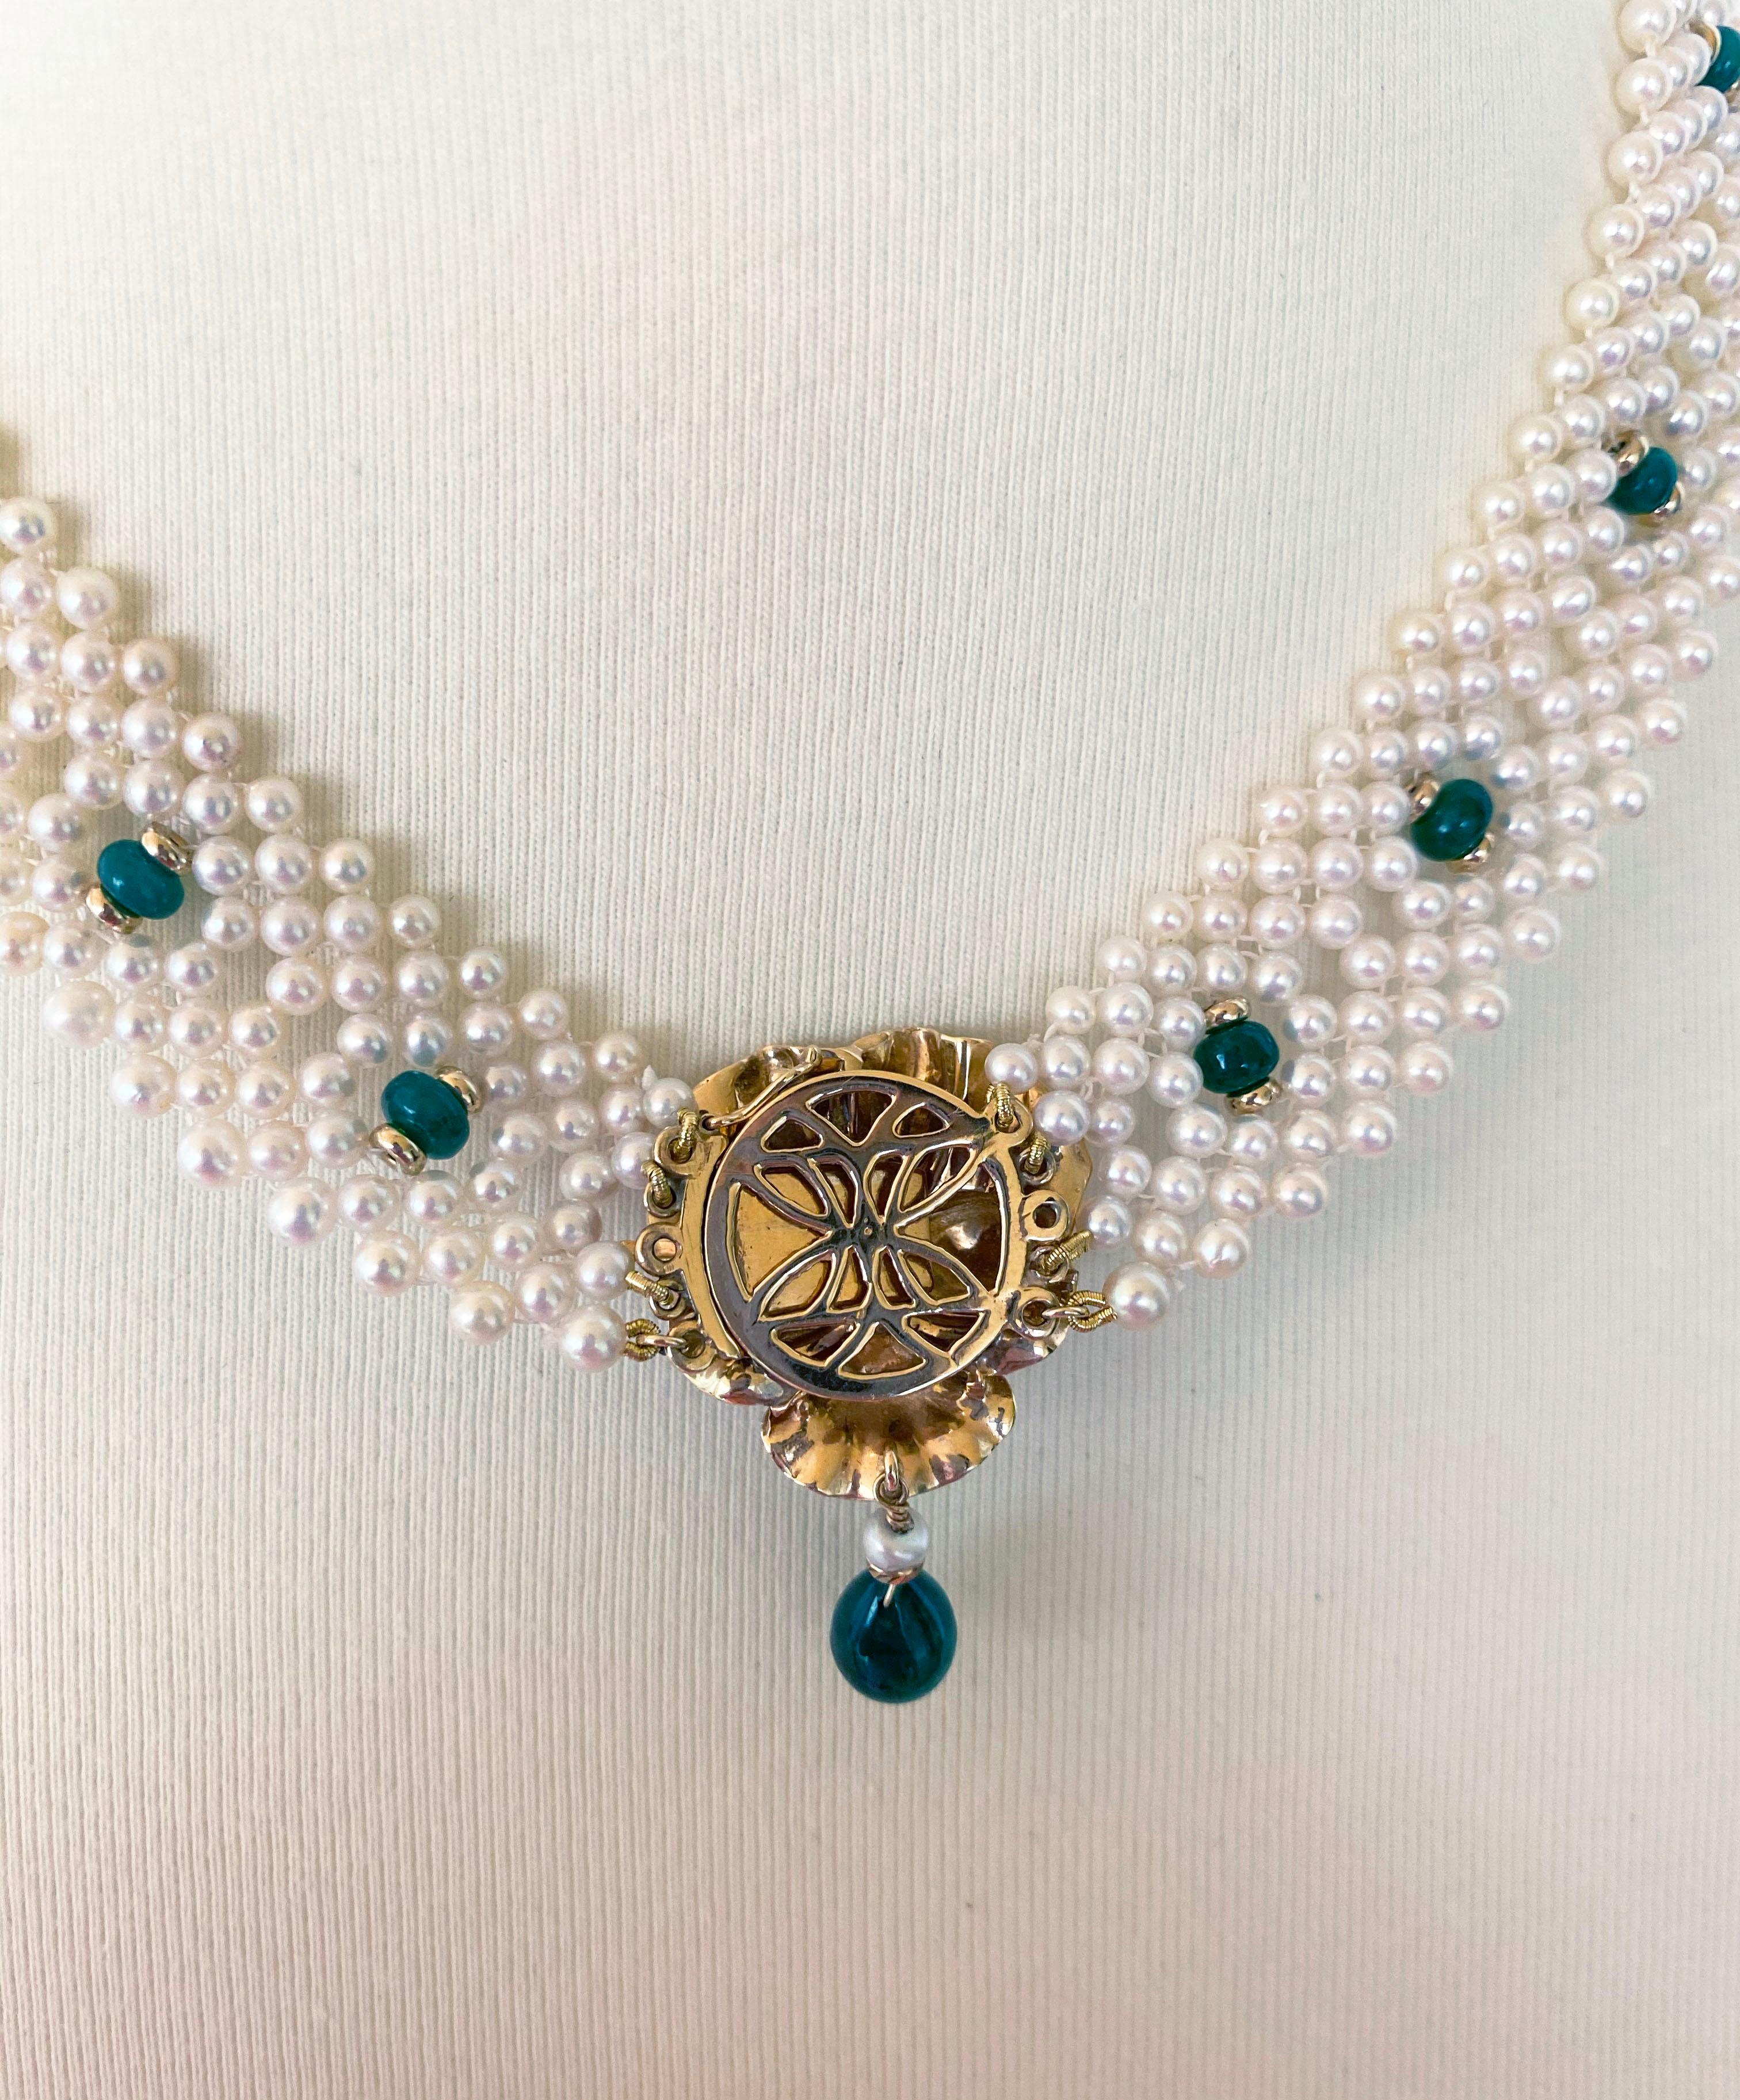 Marina J Woven Pearl & Emerald Infinity Necklace with Vintage 14k Centerpiece 7